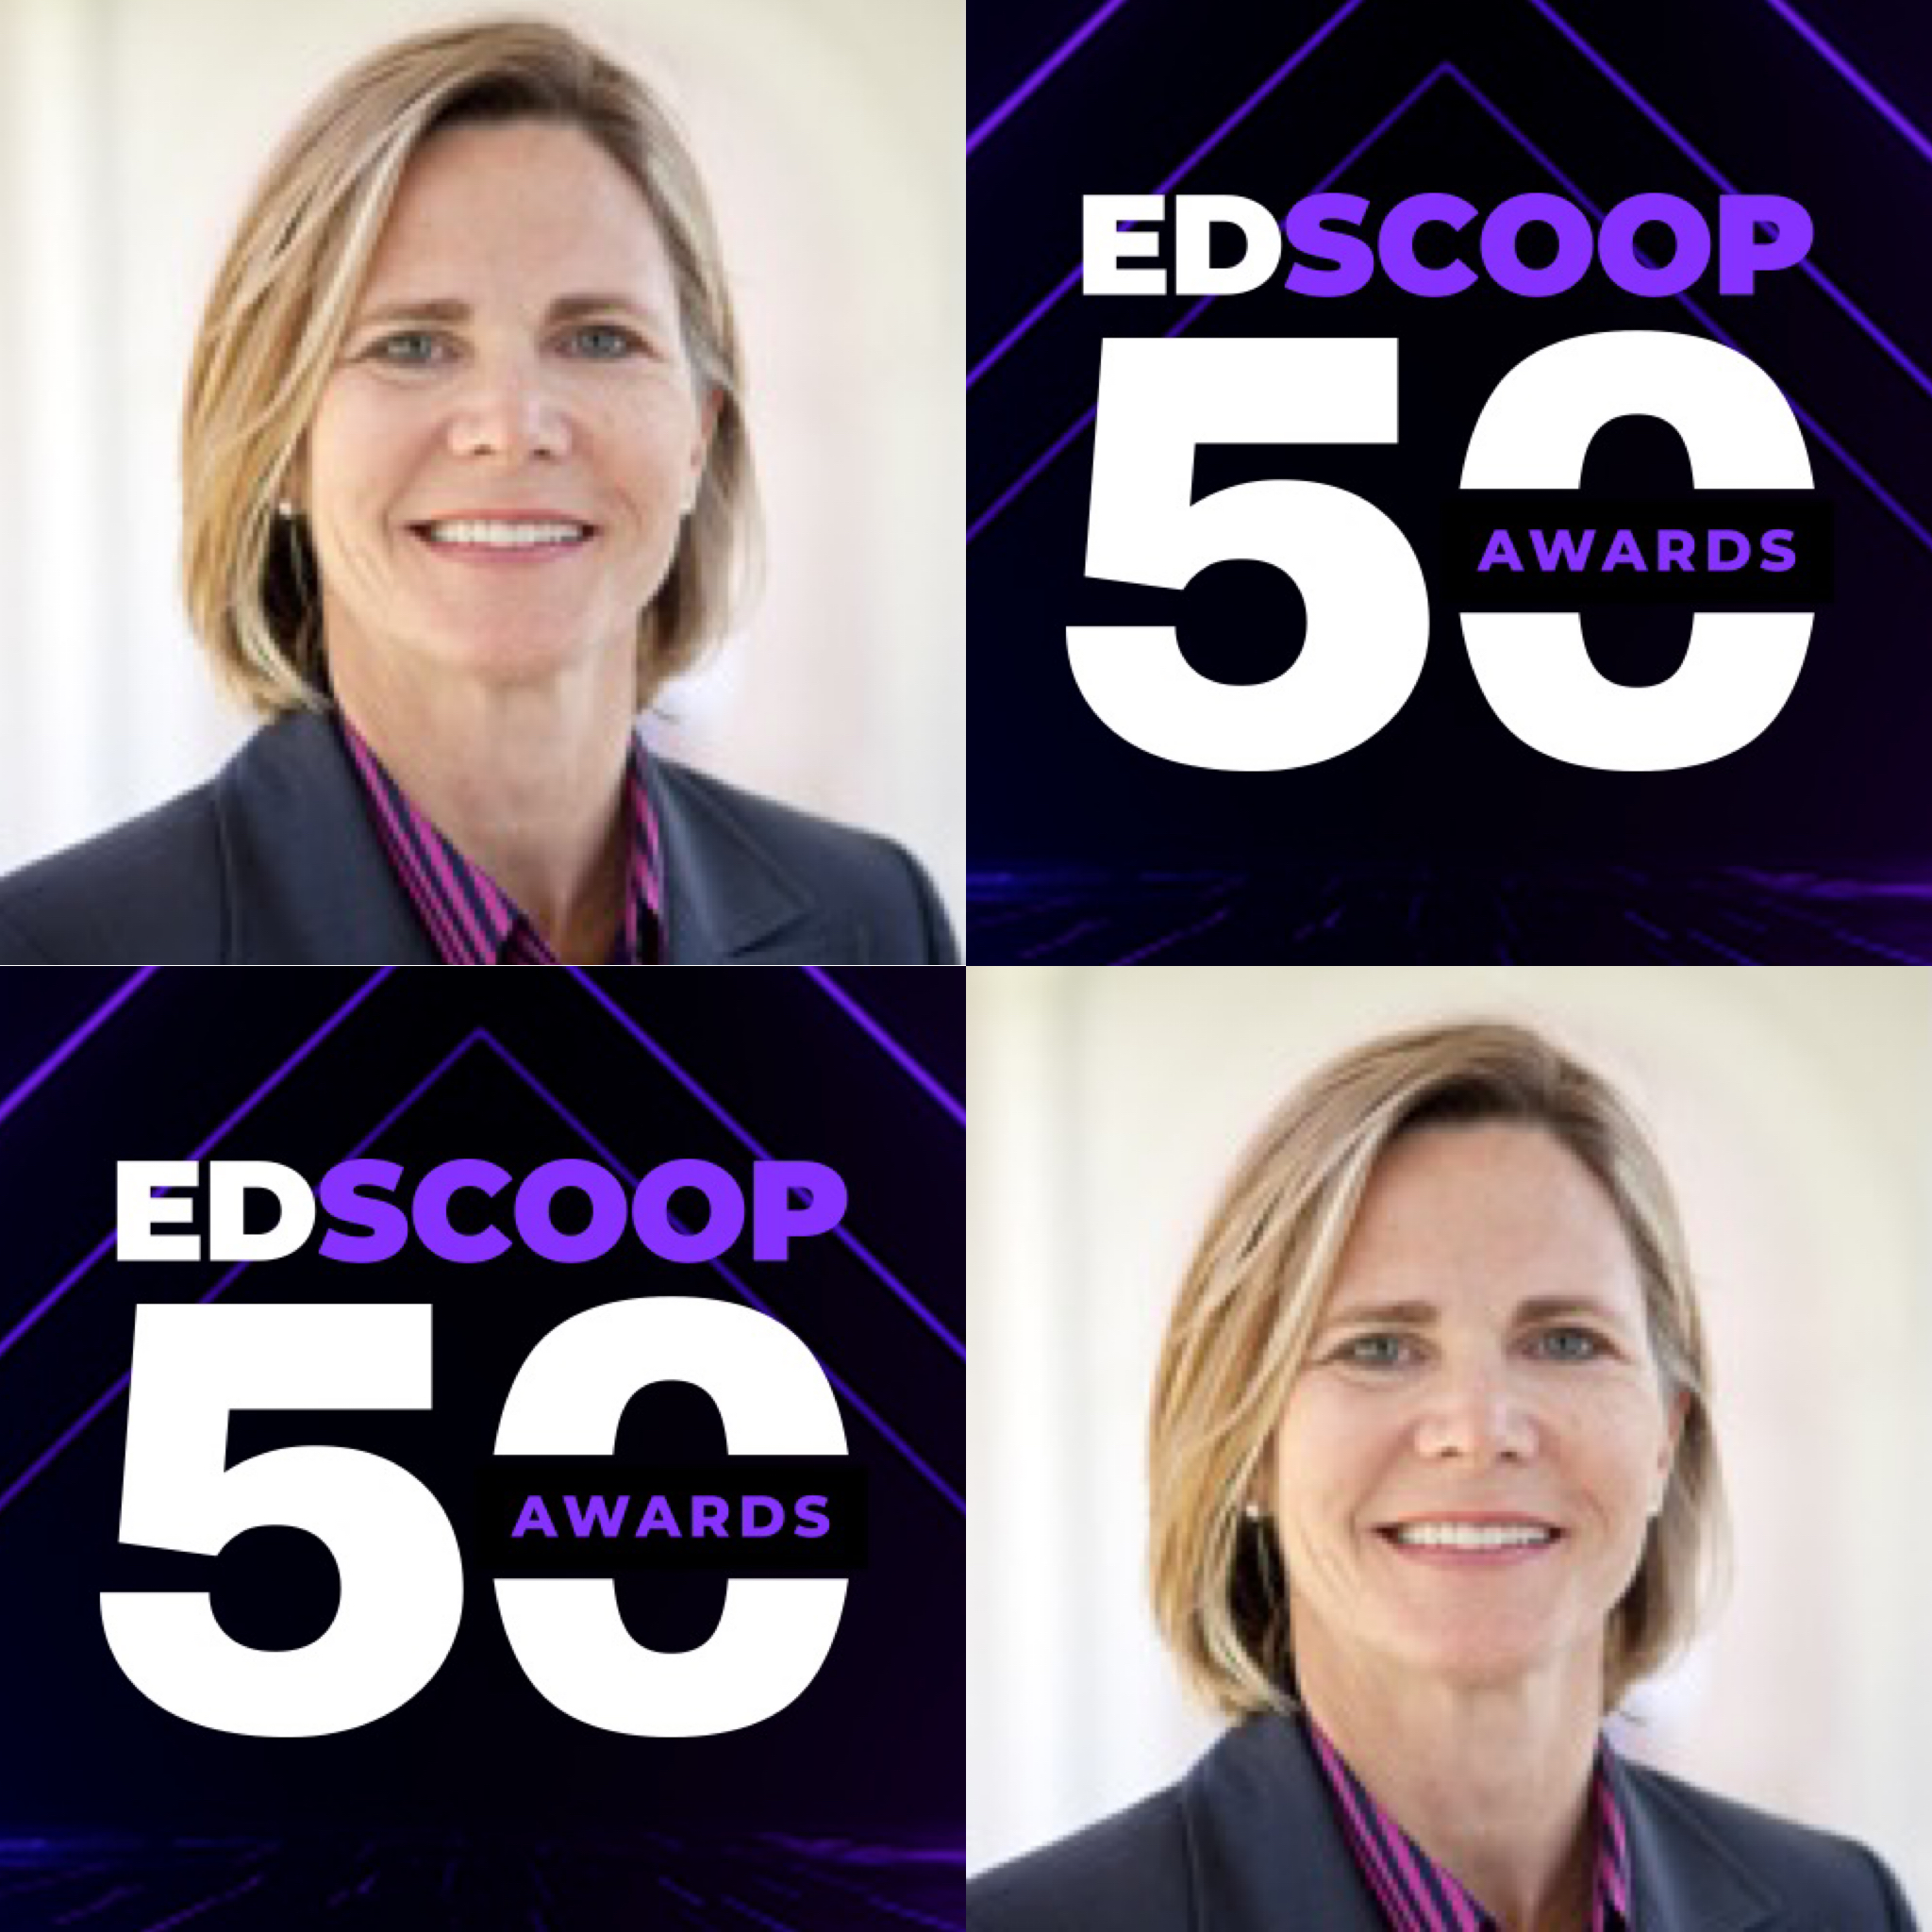 collage with photo of VIrginia Evans and EdScoop 50 Awards logo